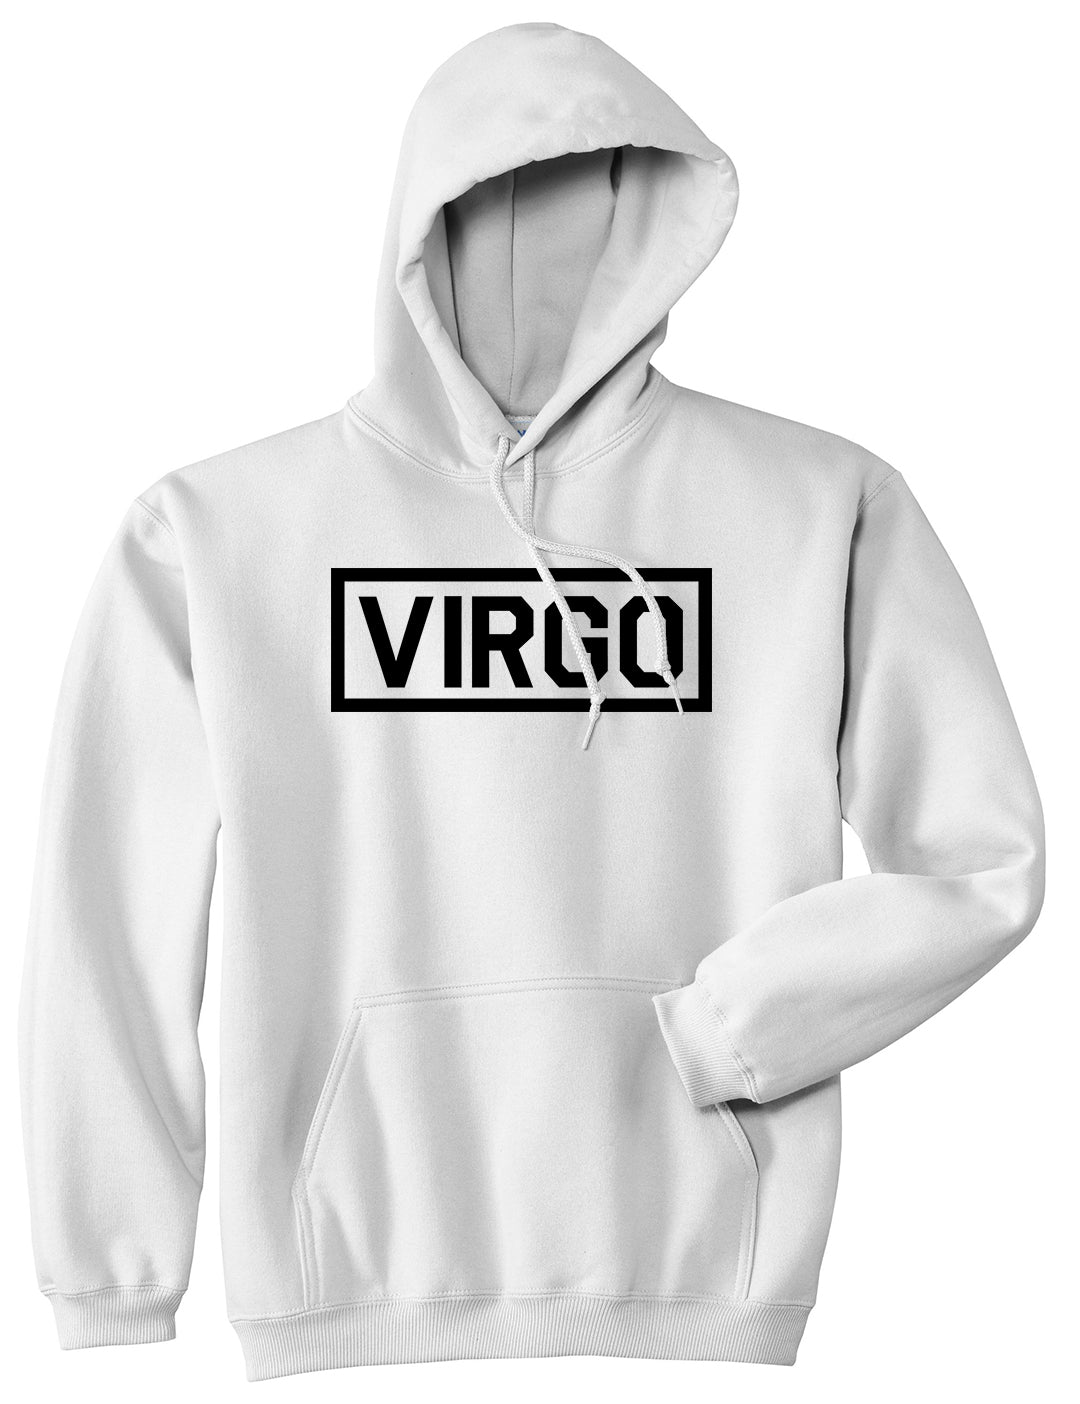 Virgo Horoscope Sign Mens White Pullover Hoodie by KINGS OF NY